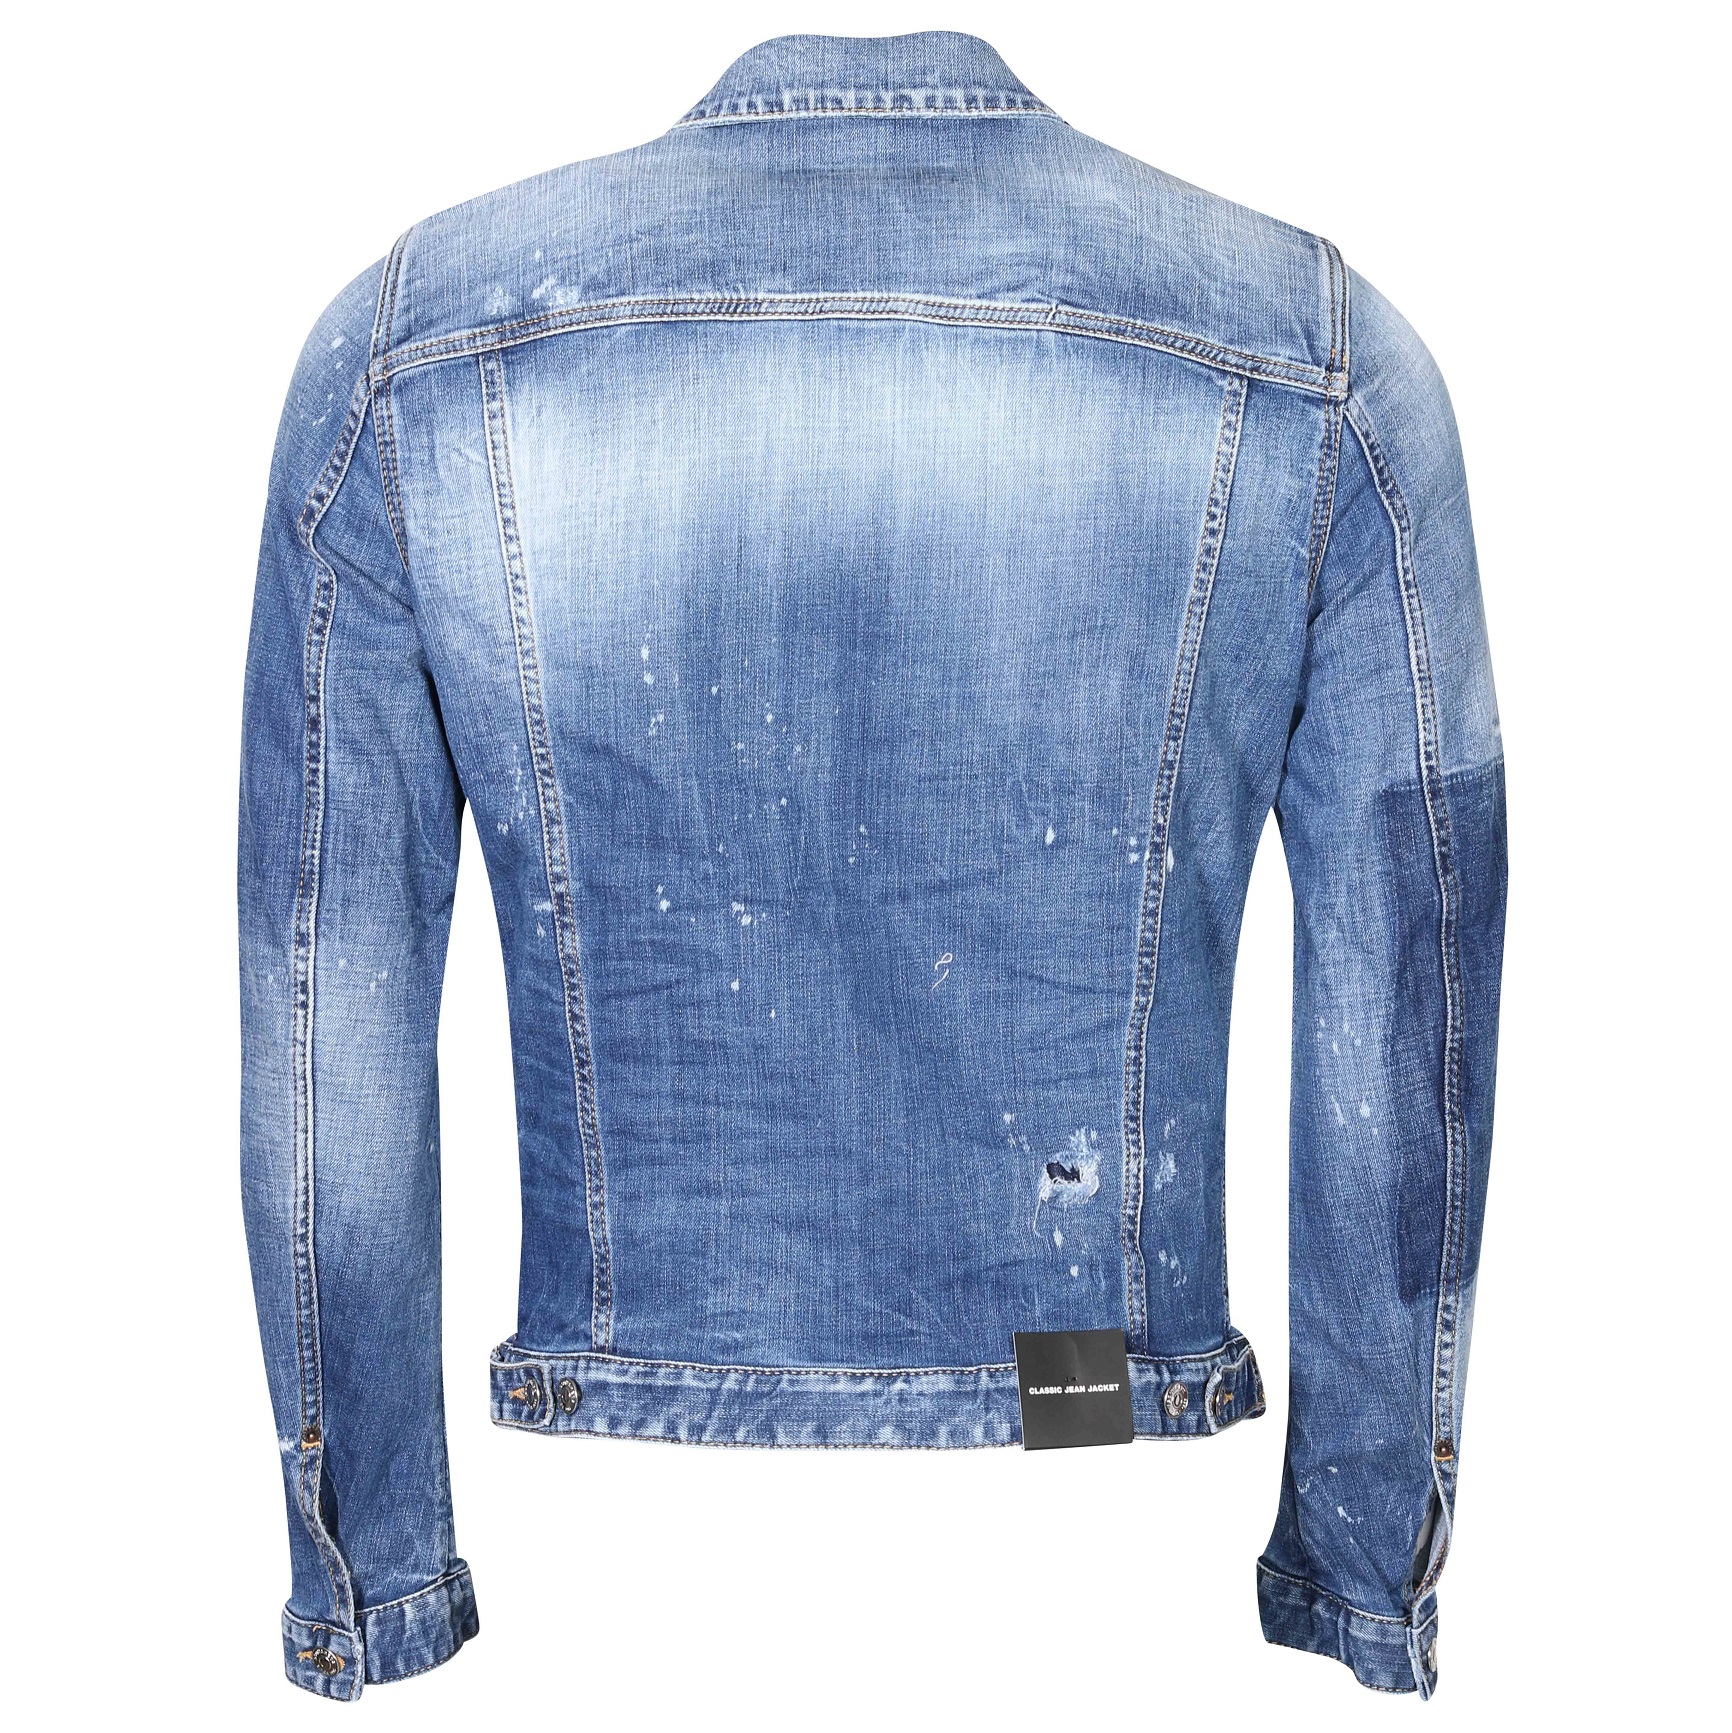 DSQUARED2 Classic Denim Jacket in Washed Light Blue